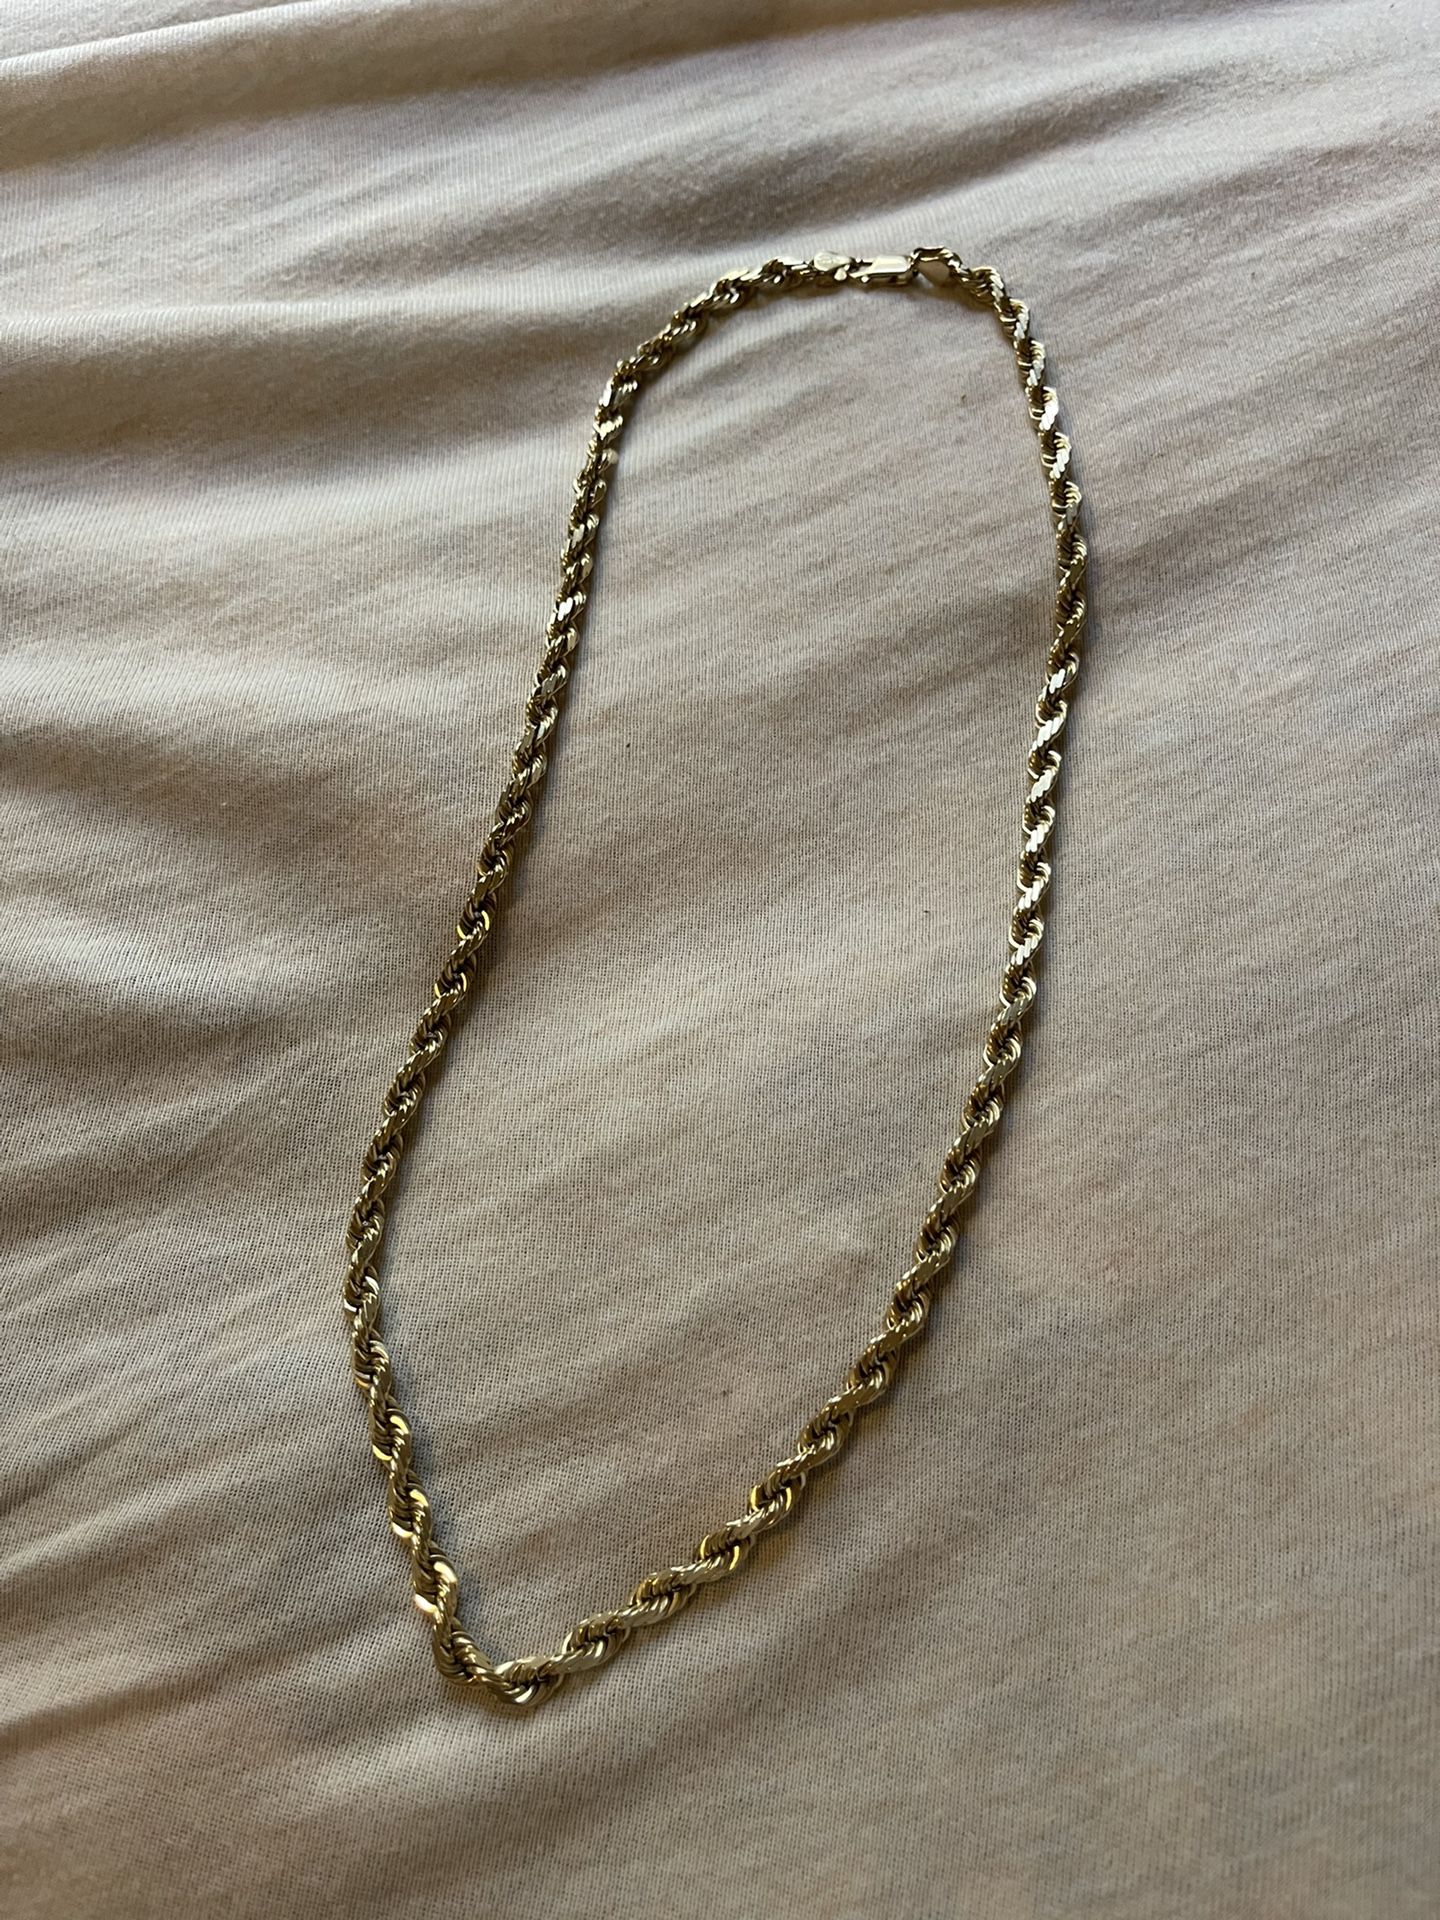 10k Gold Rope Chain 45 Grams